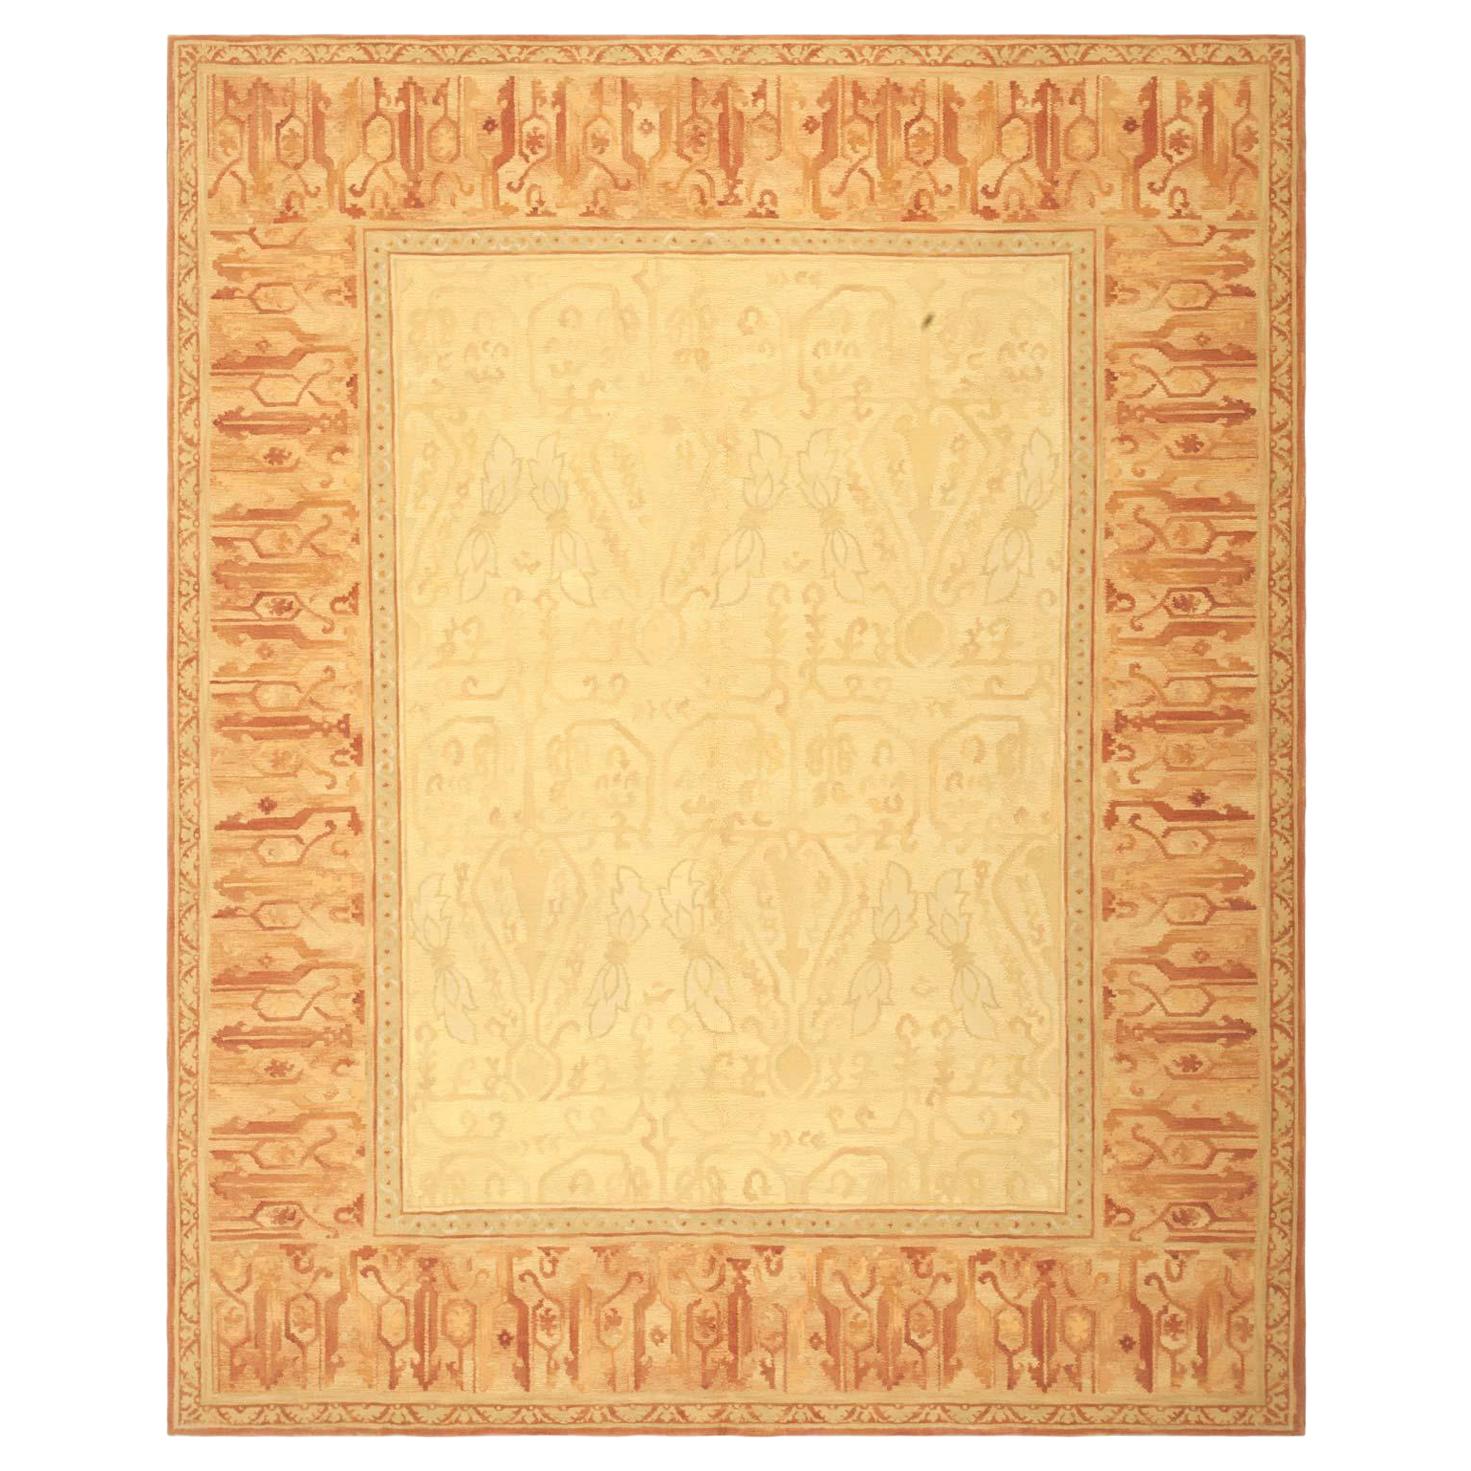 Modern French Design Chinese Savonnerie Rug